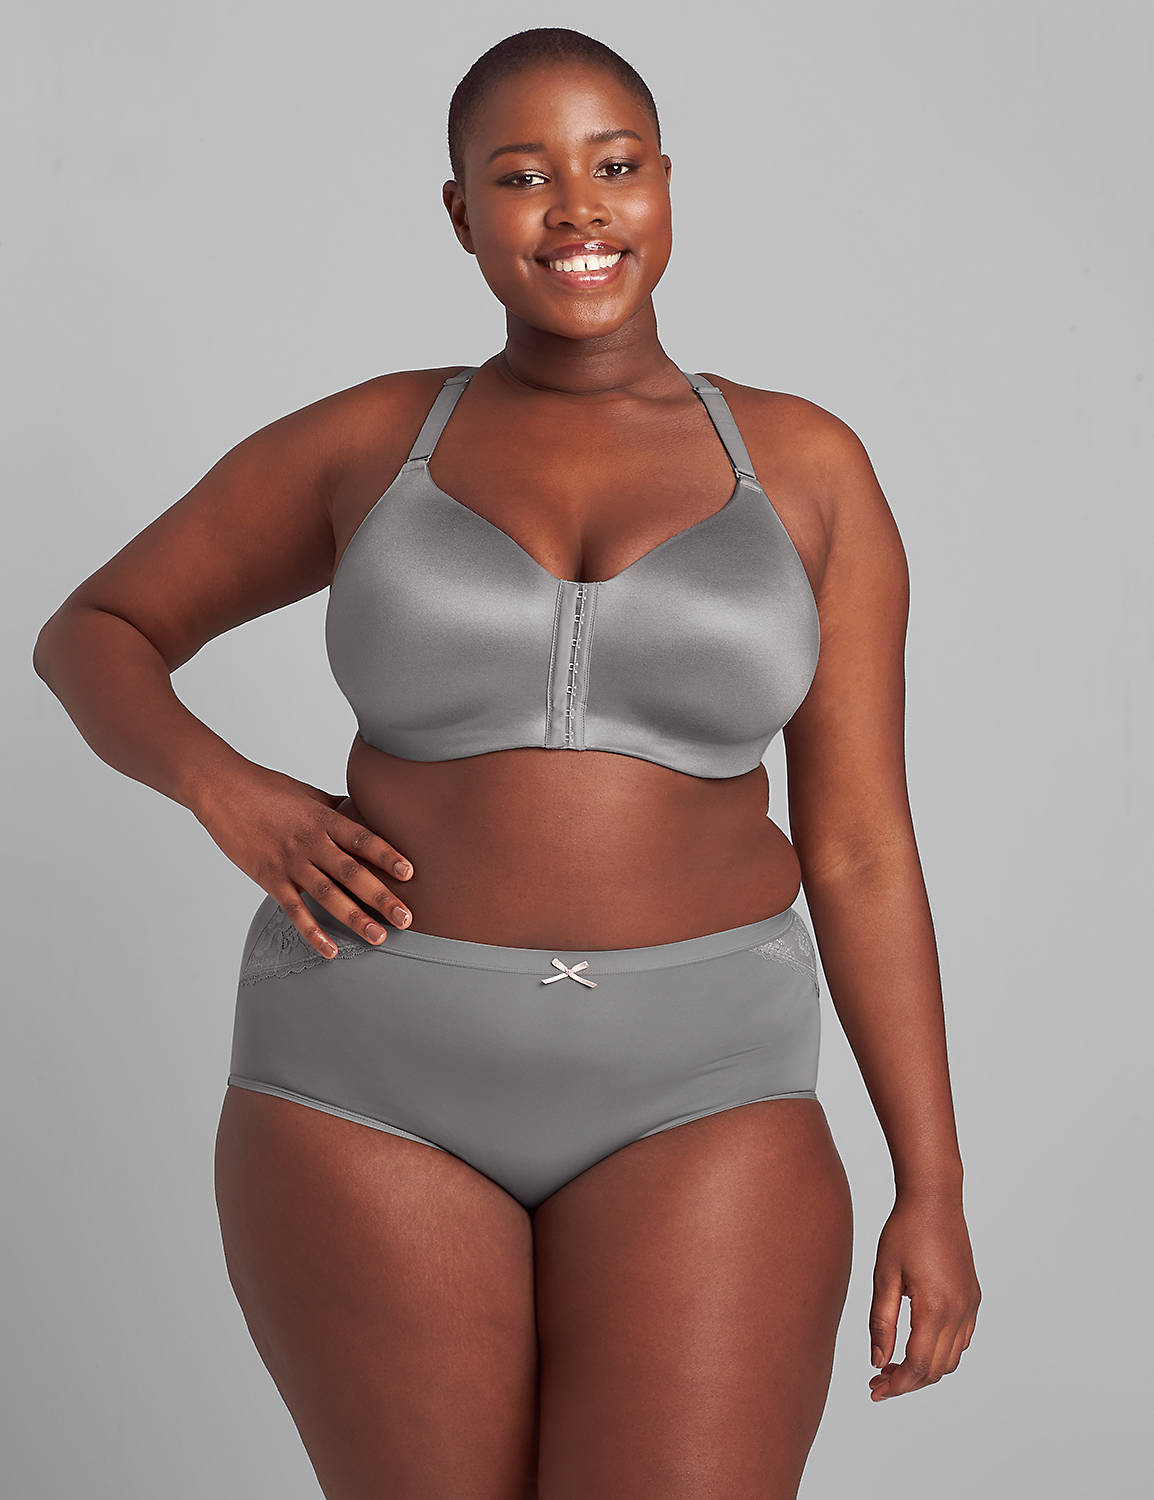 Front Close Mastectomy Bra with Modern Lace (Sister) 1105263-S -  1122506-F2:PANTONE Frost Gray:42DDD